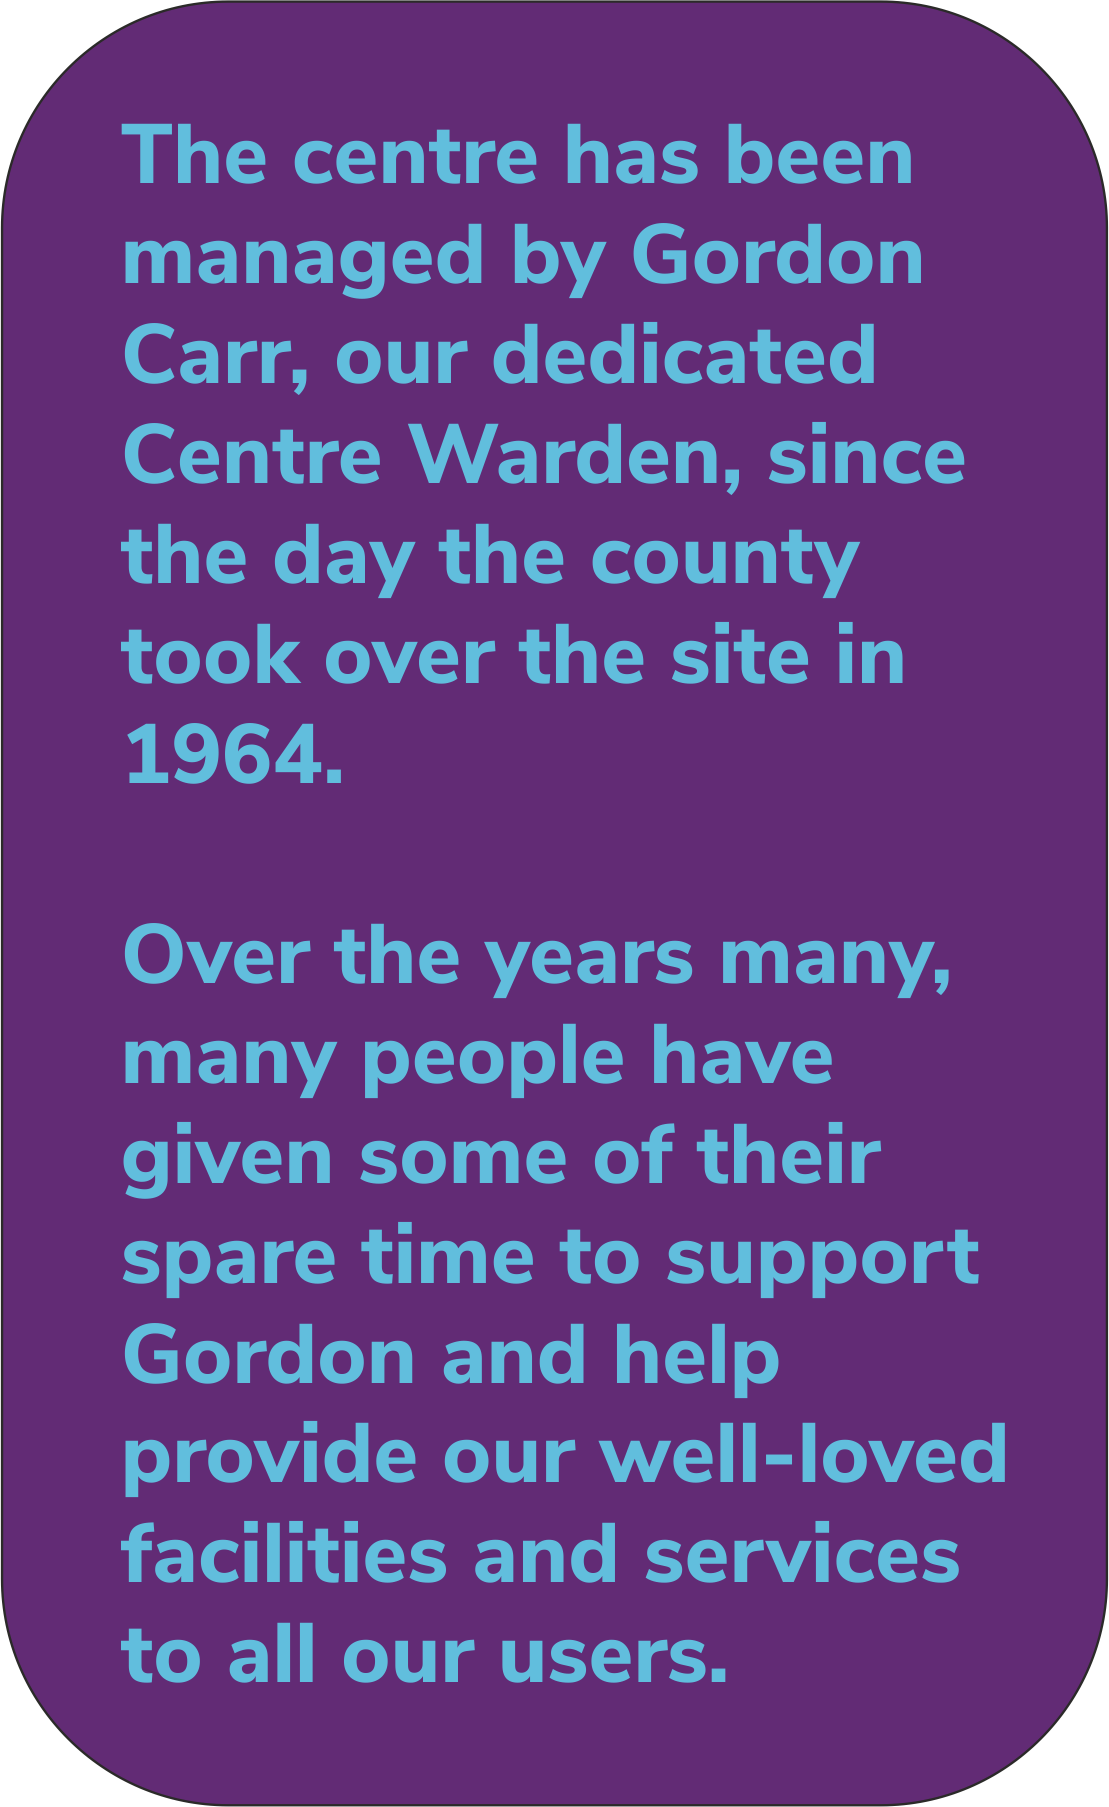 The centre has been managed by Gordon Carr, our dedicated Centre Warden, since the day the county took over the site in 1964. Over the years many, many people have given some of their spare time to support Gordon and help provide our well-loved facilities and services to all our users.      